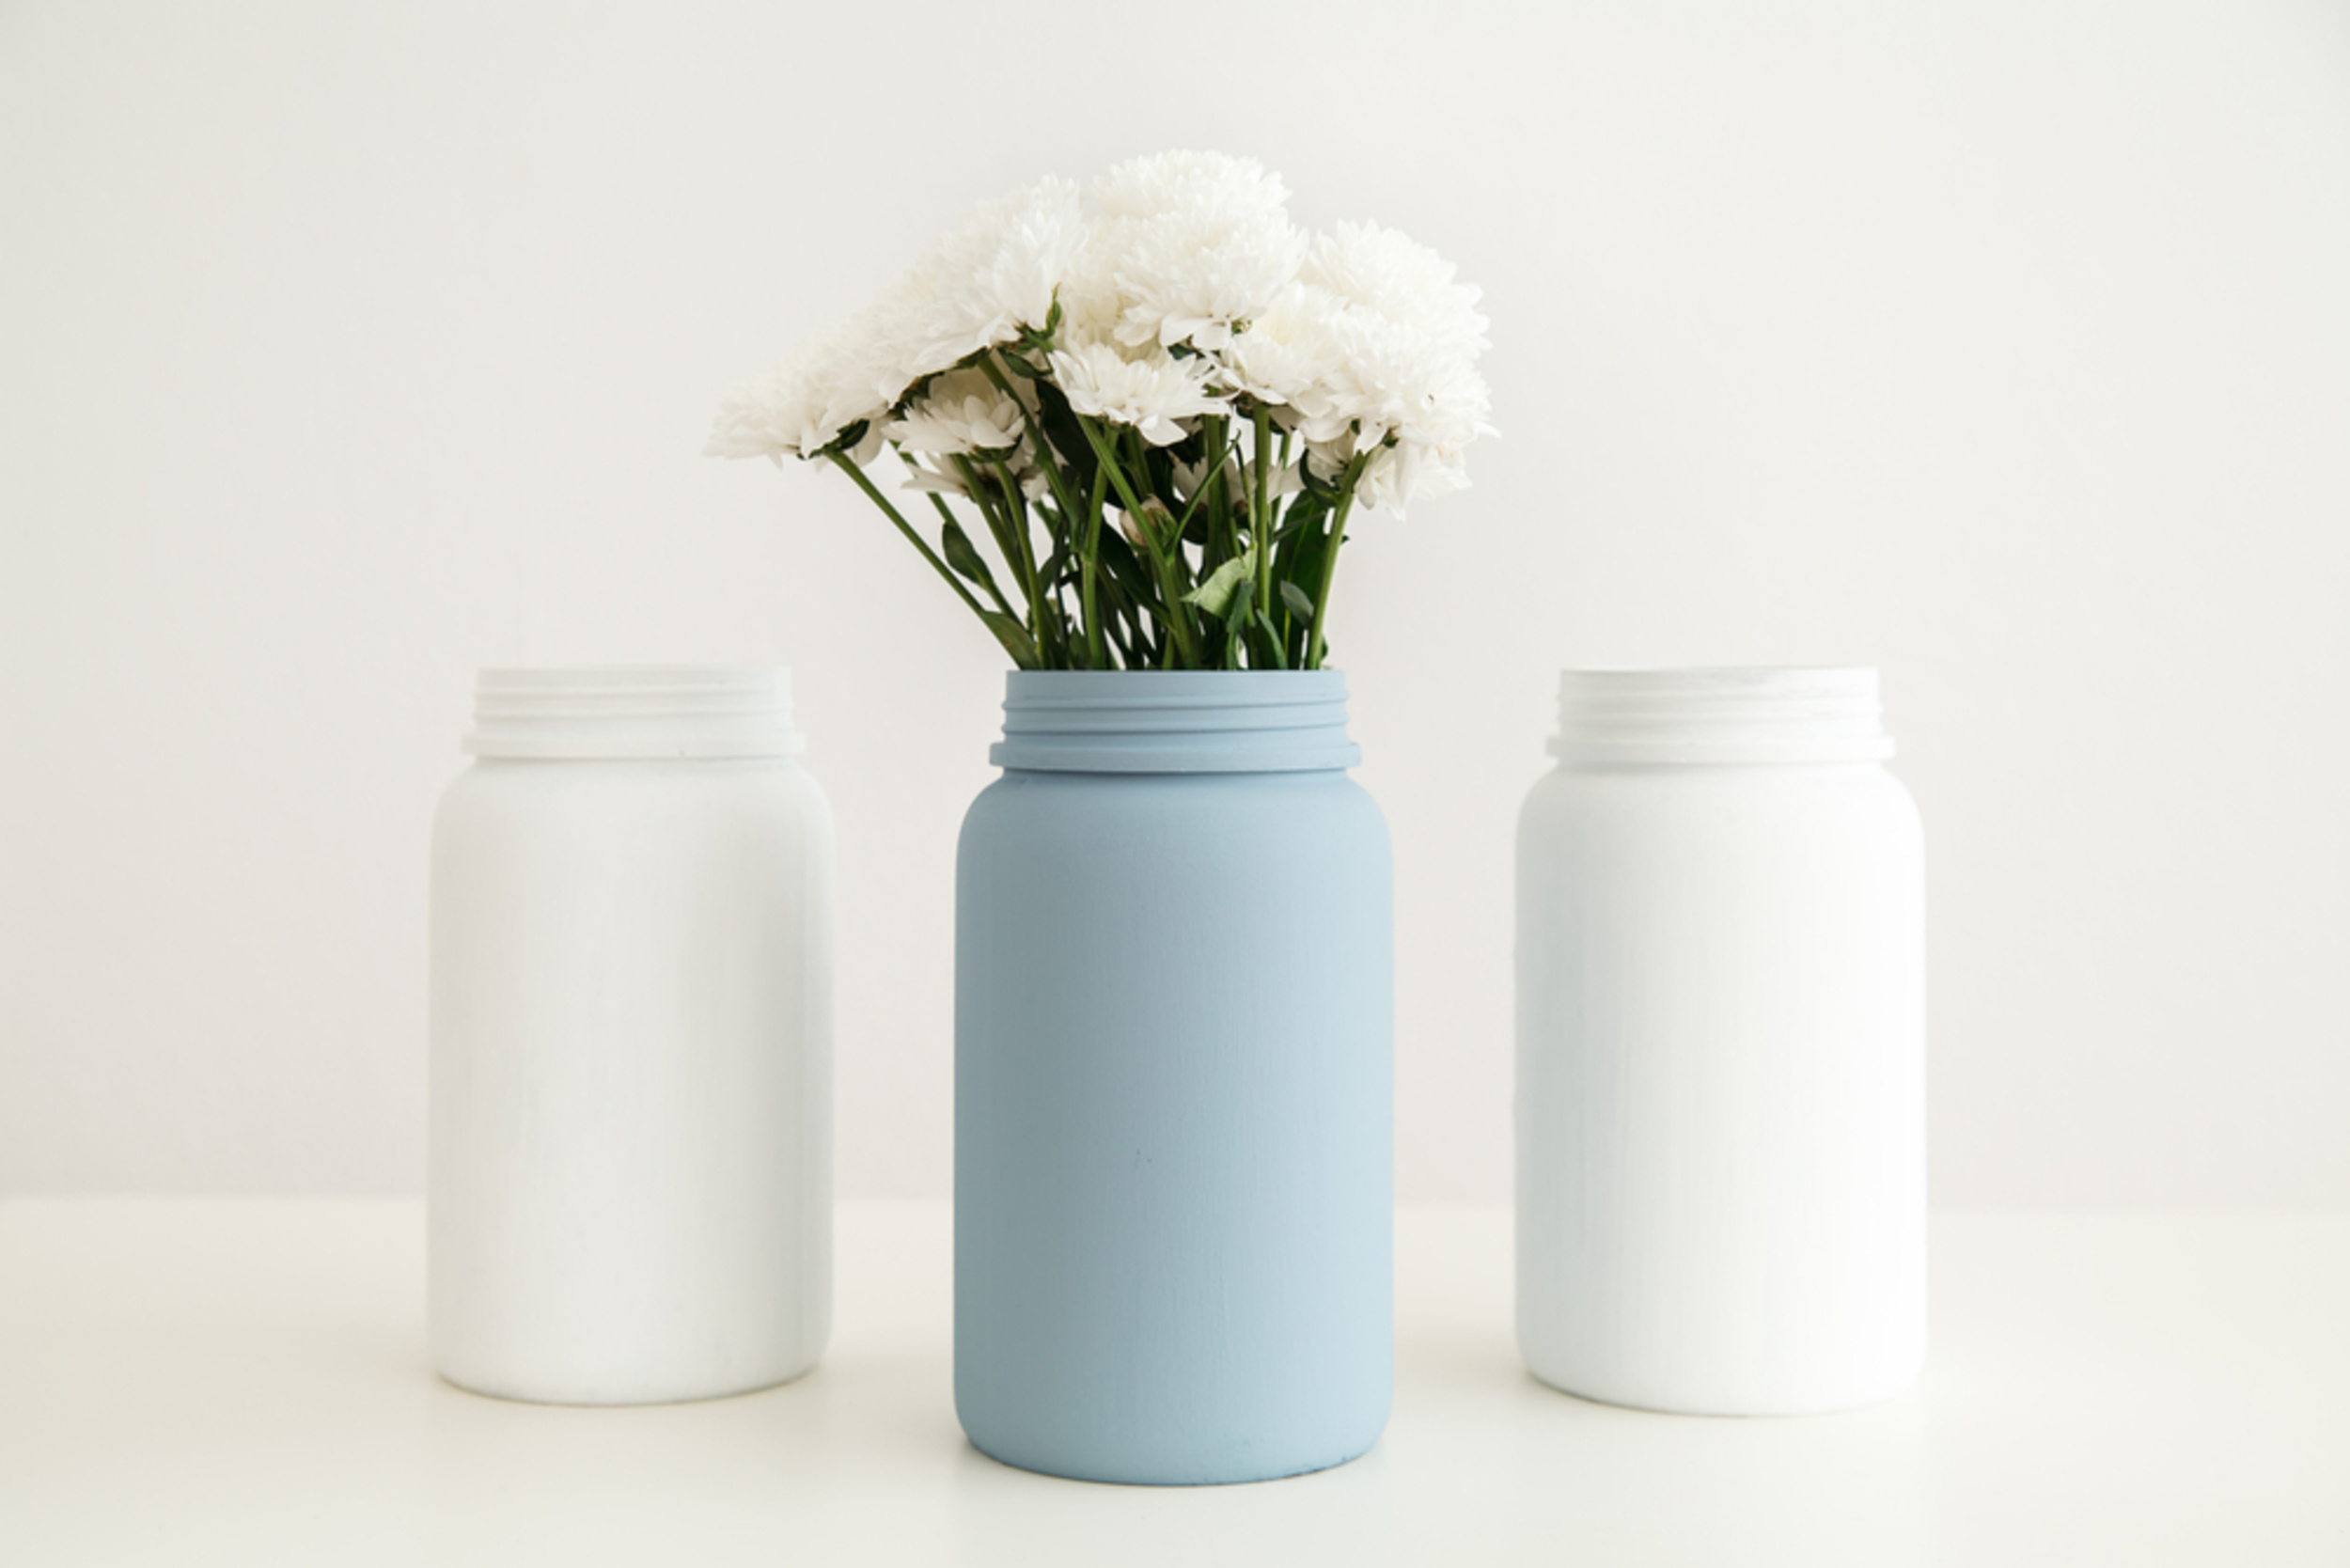 <p>Paint can be a seriously easy way to spruce up your home's decor in no time. Use textured paints to add dimension to old vases, furniture — even jelly jars and other DIY decor pieces — without putting in too much effort. </p><p><a href='https://www.msn.com/en-us/community/channel/vid-cj9pqbr0vn9in2b6ddcd8sfgpfq6x6utp44fssrv6mc2gtybw0us'>Follow us on MSN to see more of our exclusive lifestyle content.</a></p>